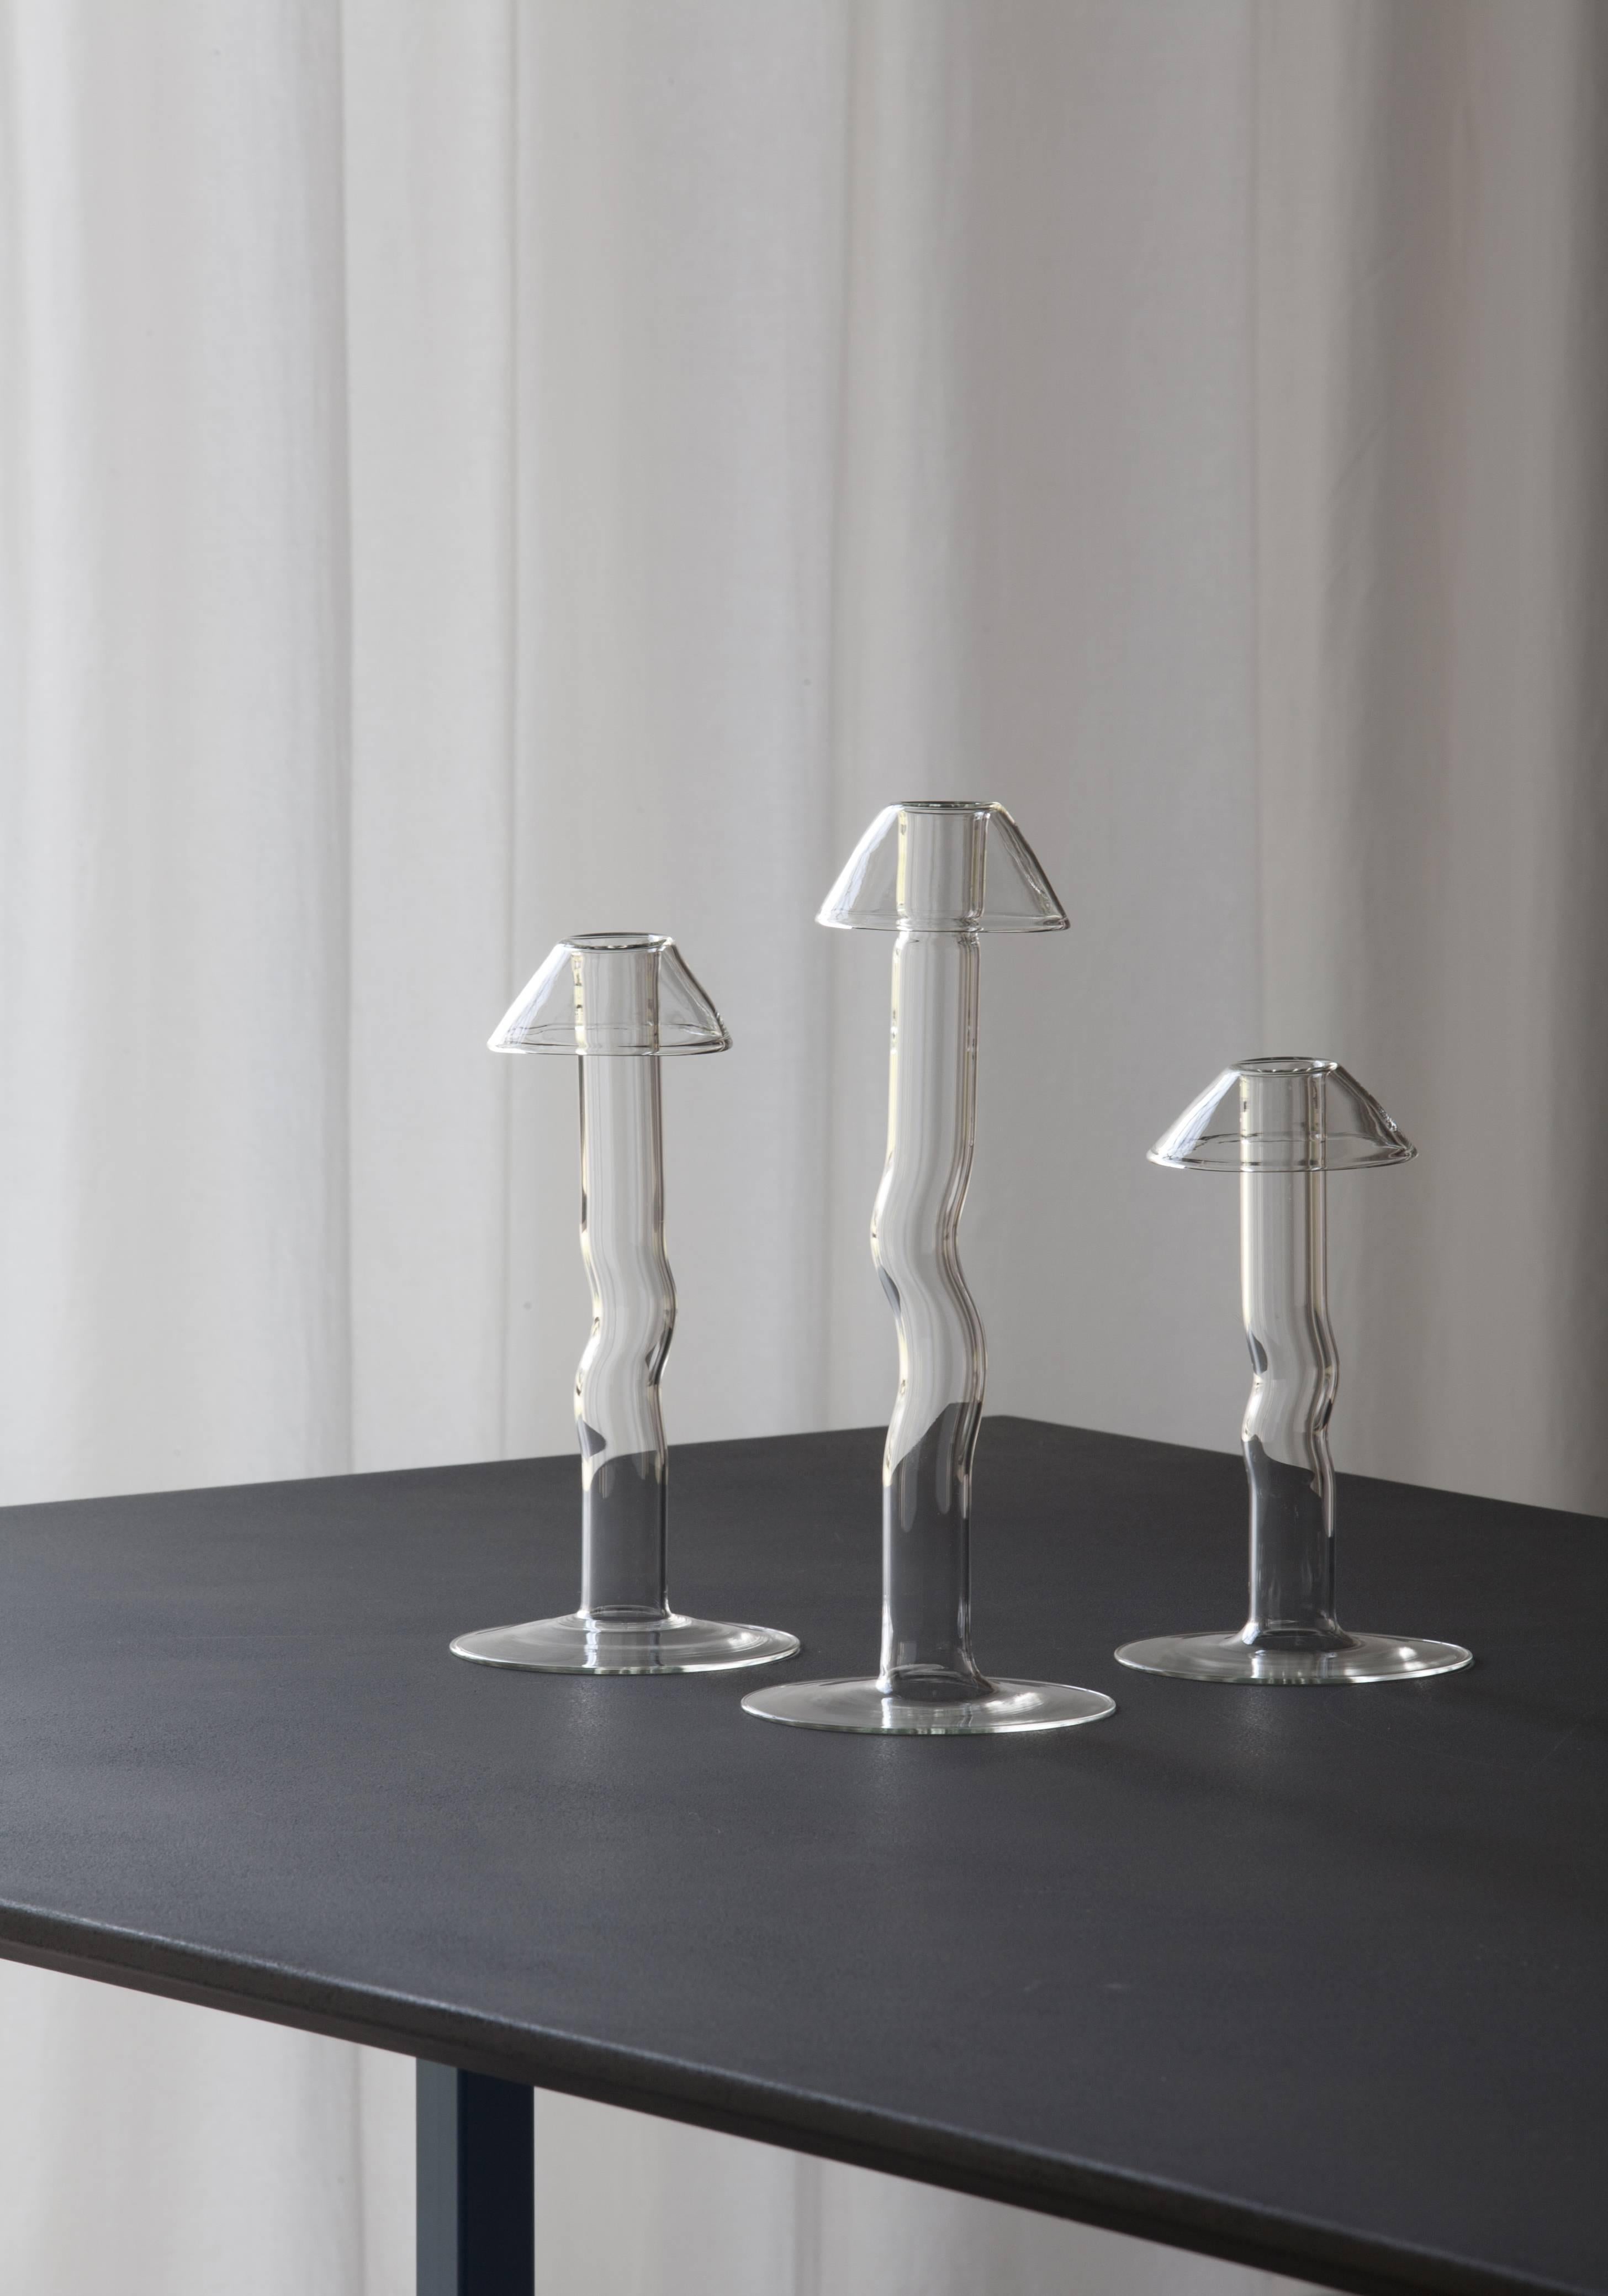 Mykes is a collection of refined hand-blown glass candle stands produced in three different sizes with the shape of a mushroom. Inspired by ancient Greek culture, the mushroom was considered a symbol of life endowed with divine properties. The